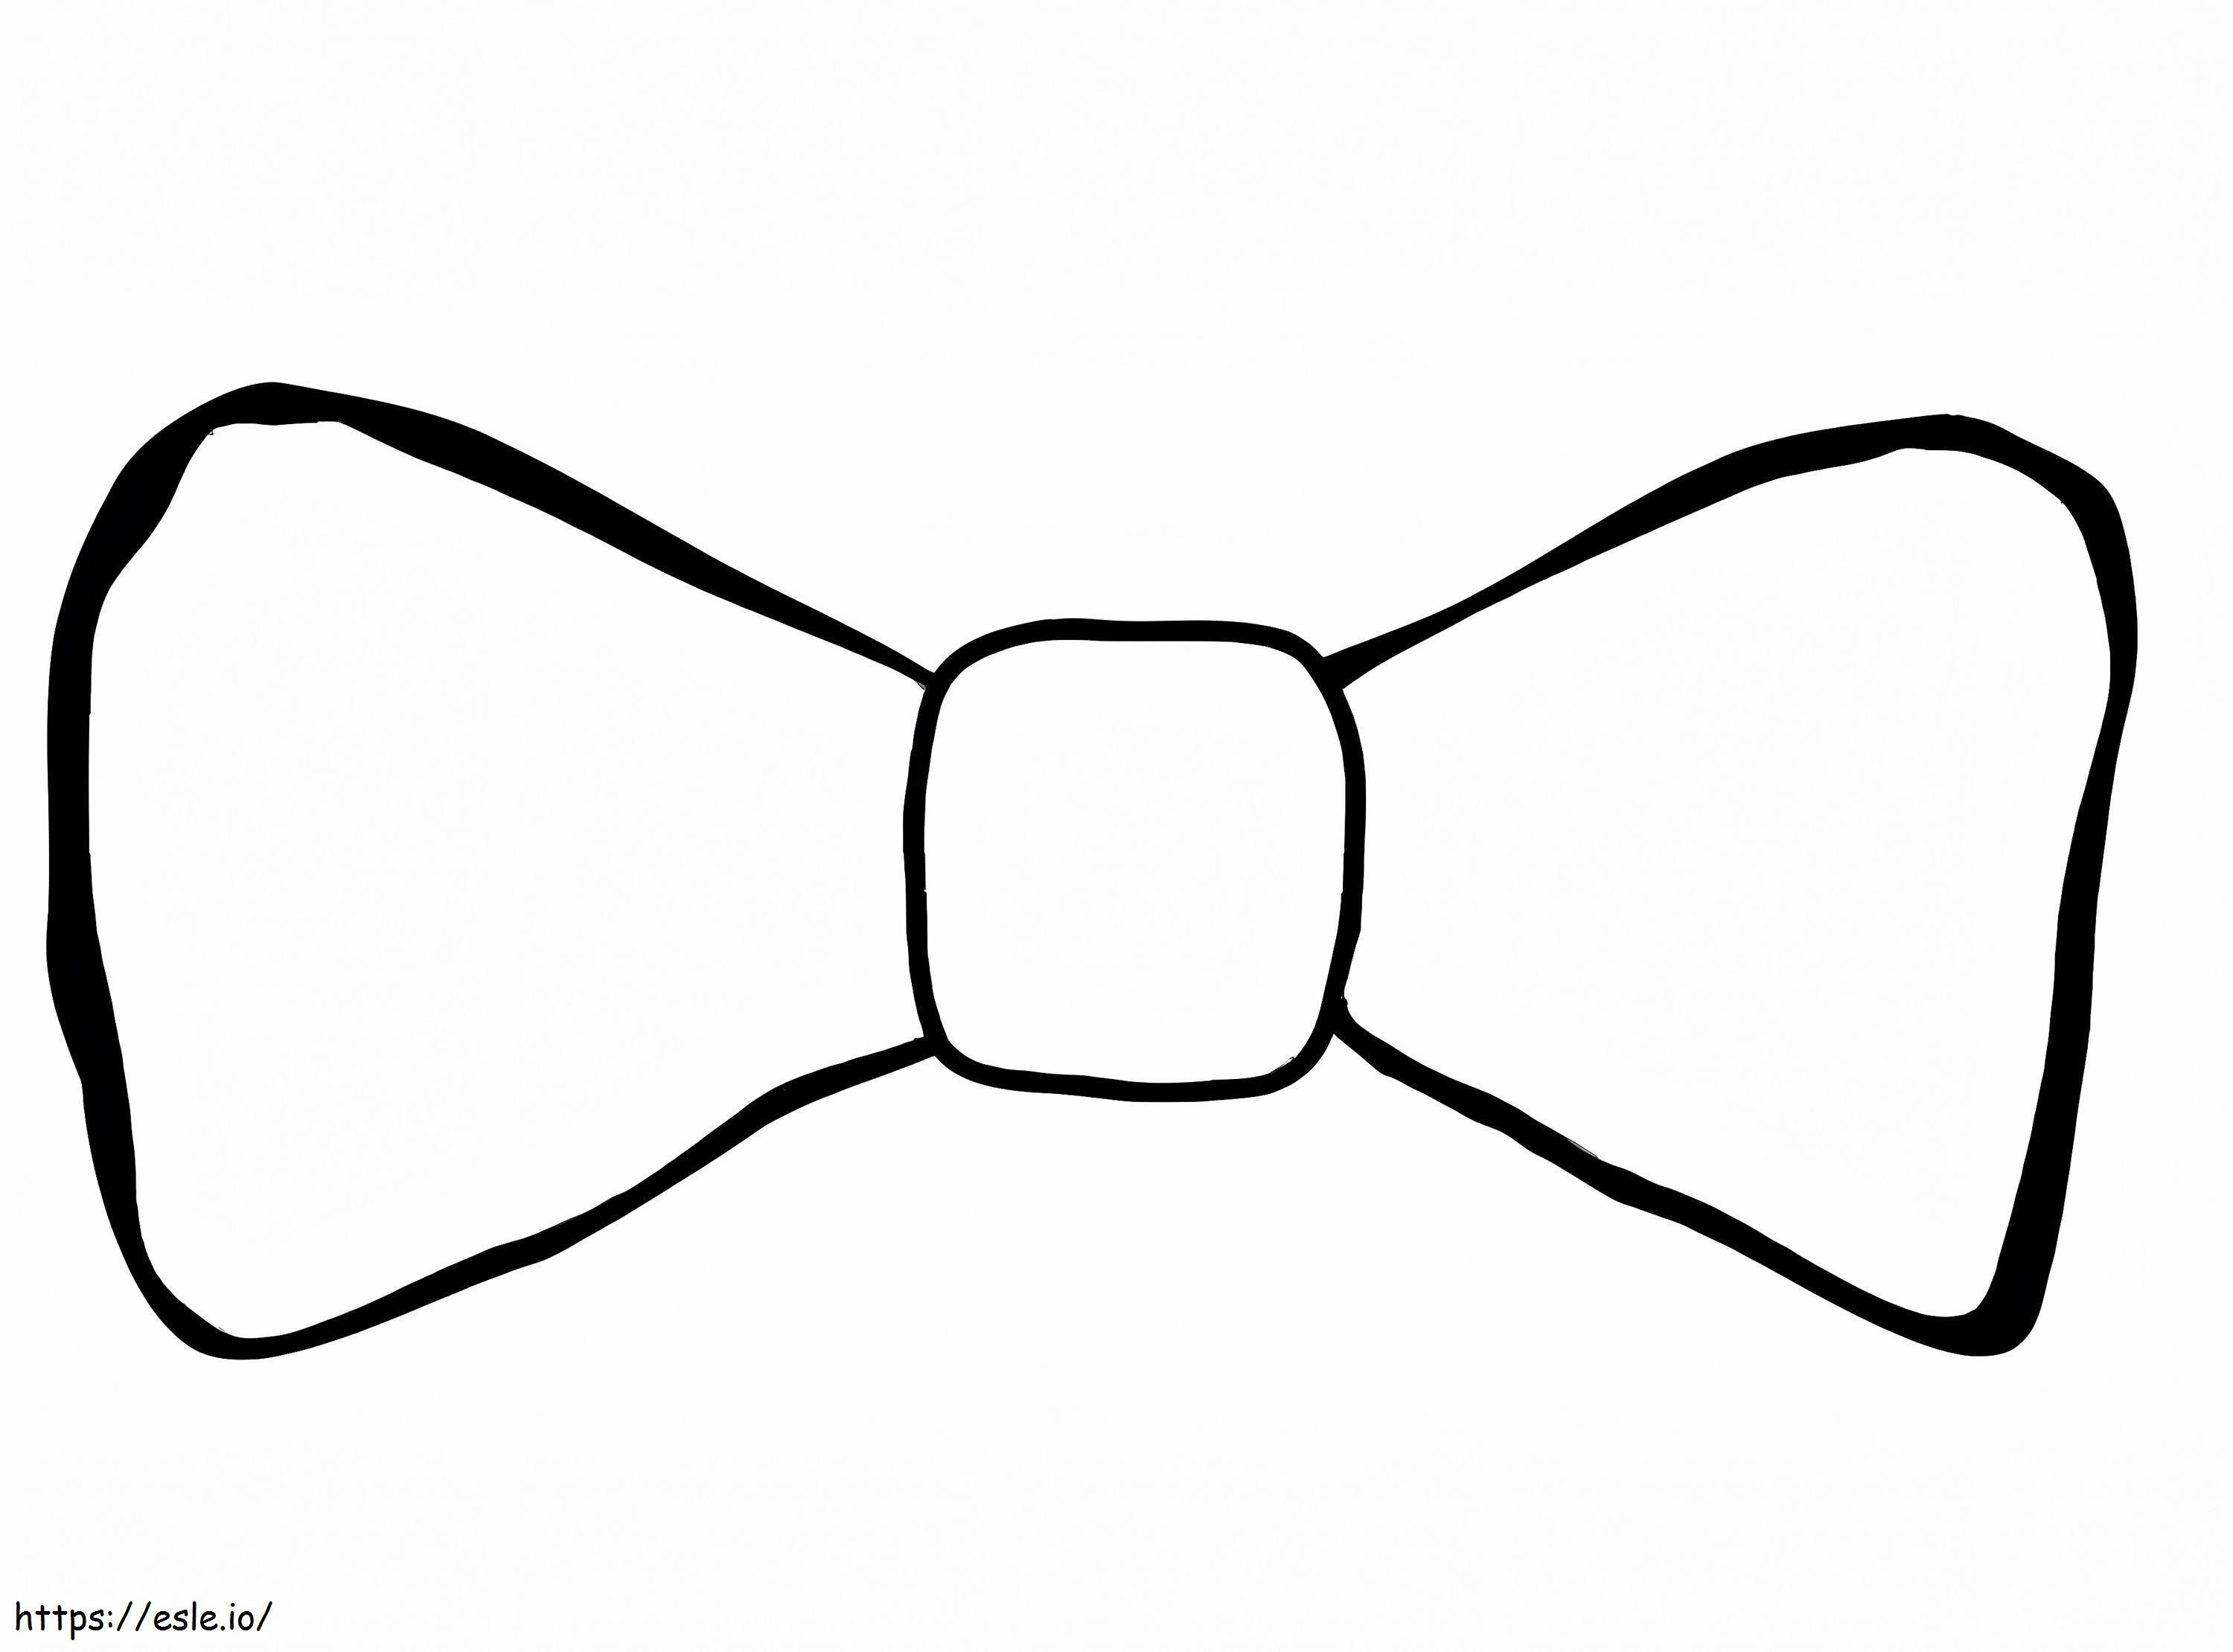 Simple Bow coloring page